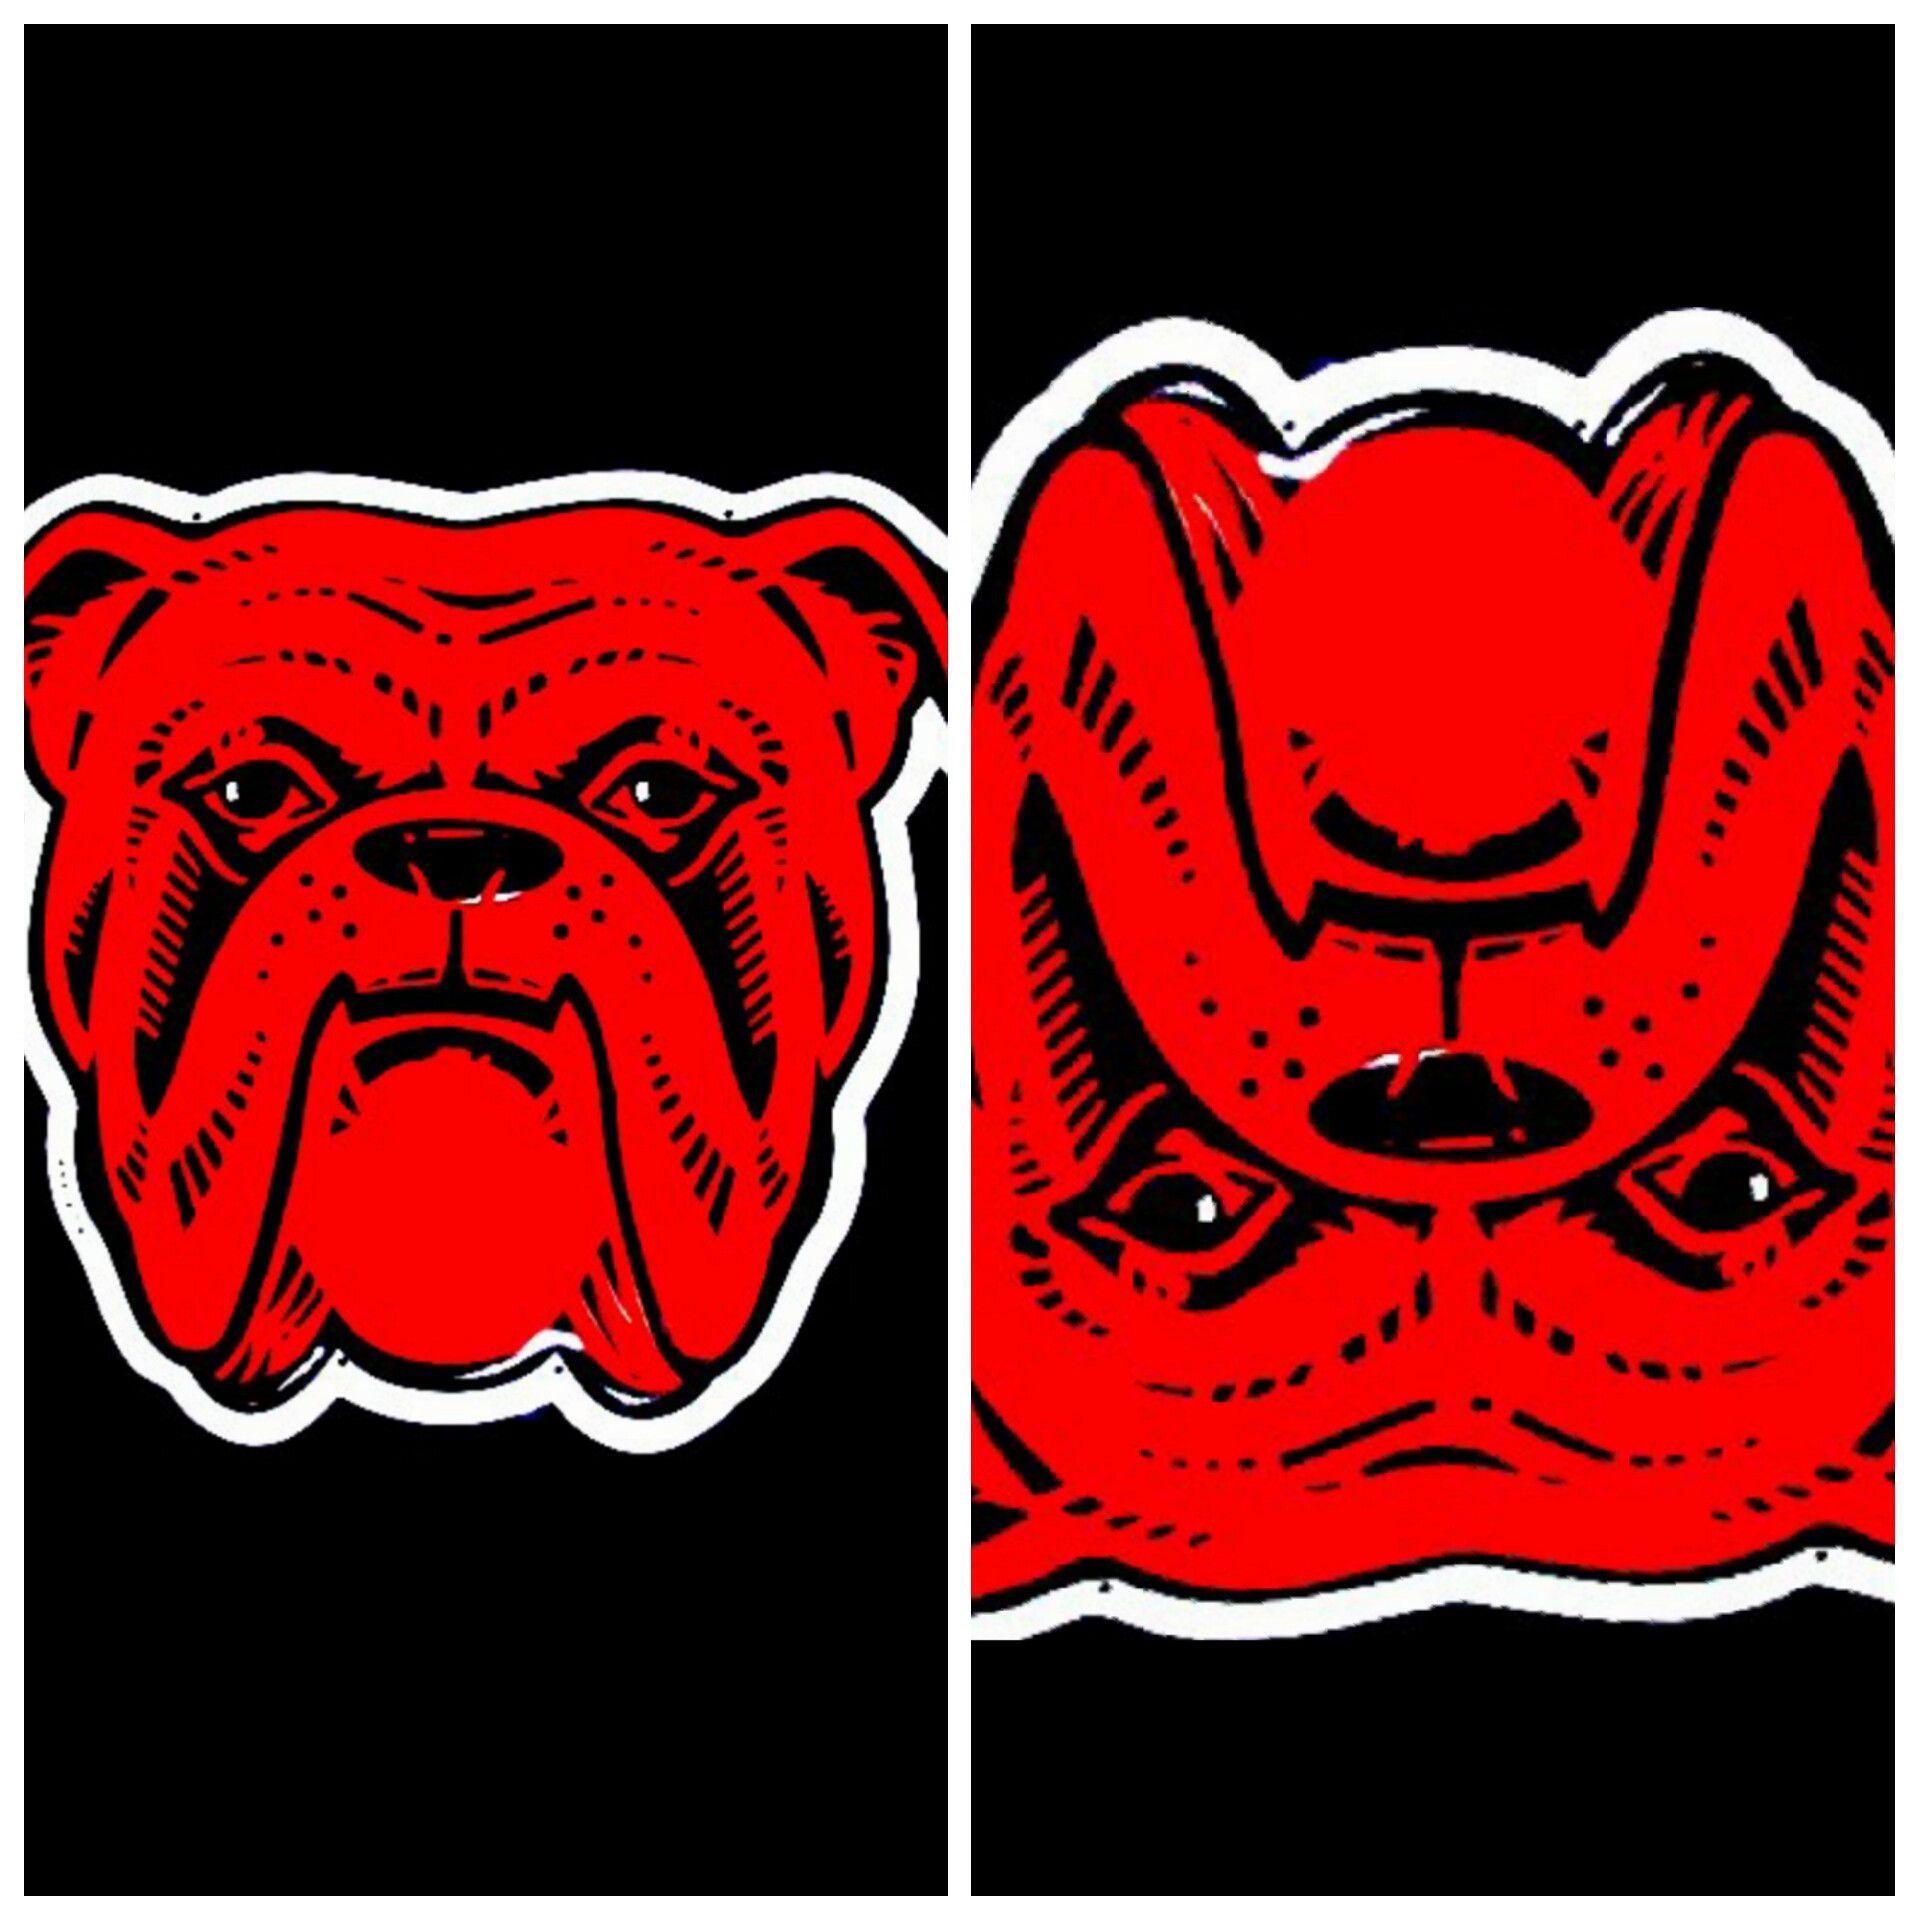 Red Dog Logo - From my youth. Red Dog Logo. Flipped upside down. Cover the eyes